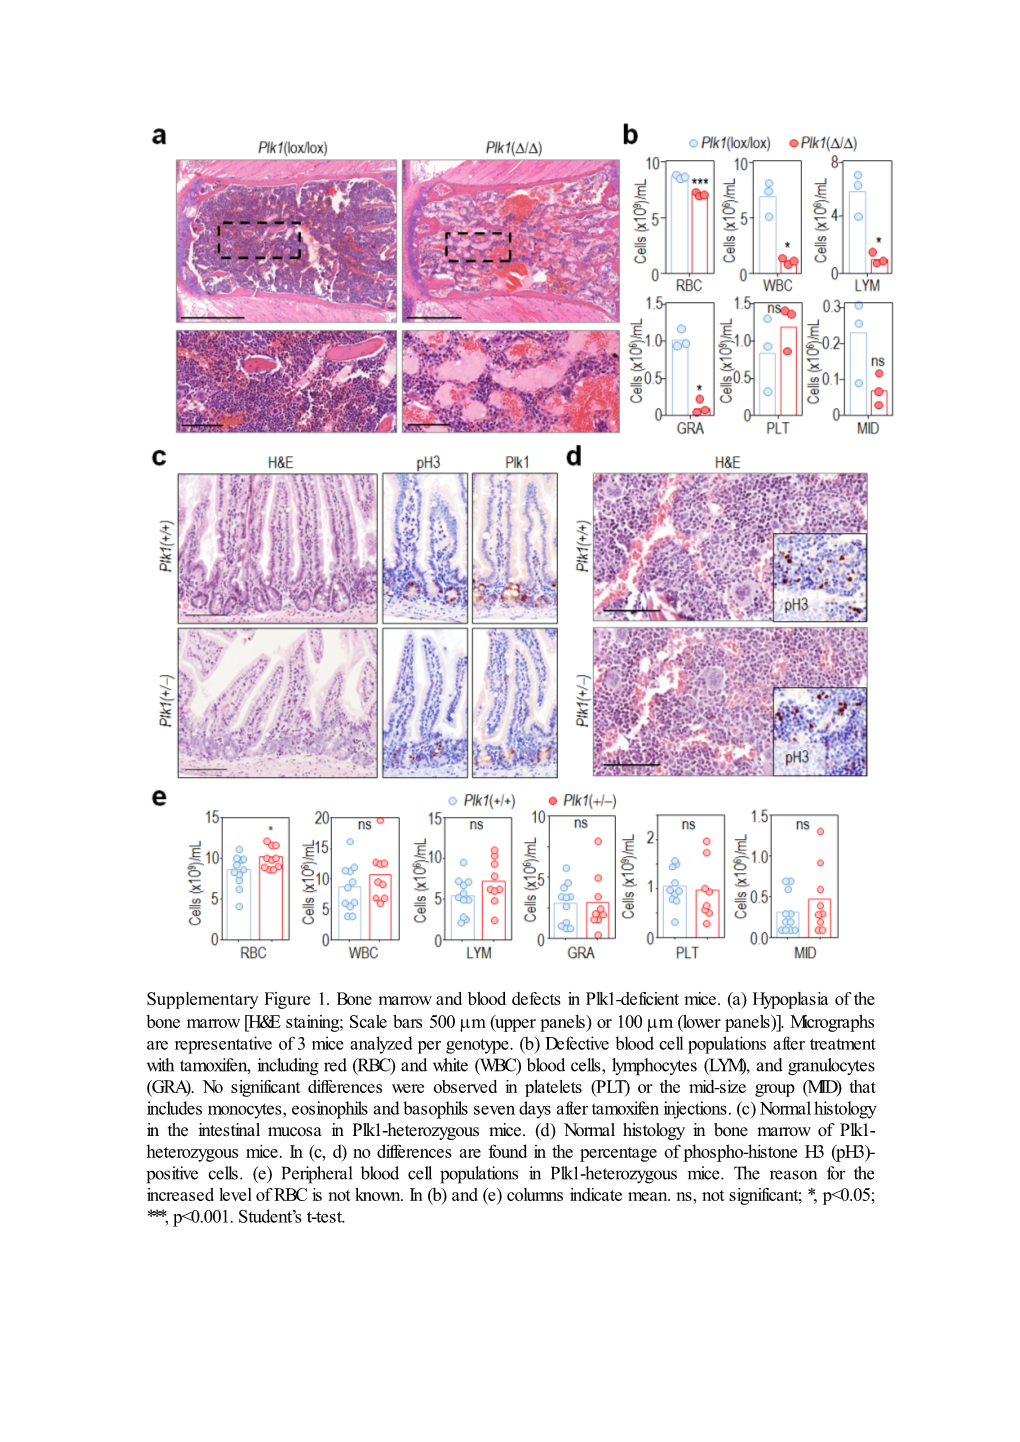 Supplementary Figure 1. Bone Marrow and Blood Defects in Plk1-Deficient Mice